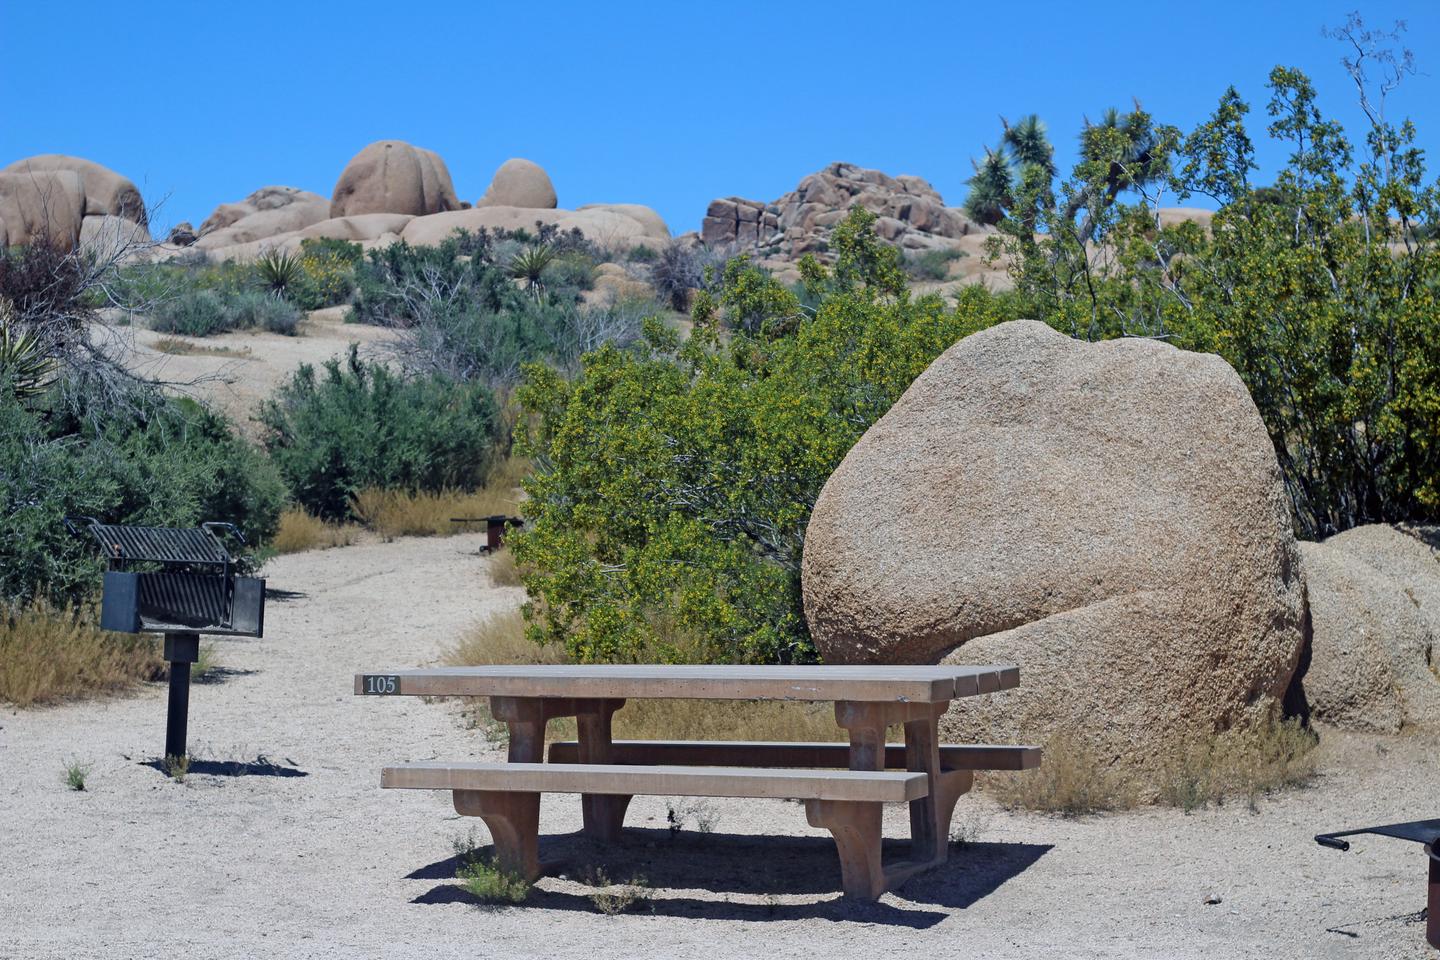 Campsite with picnic table surrounded by boulders and green plants.
Campsite.
